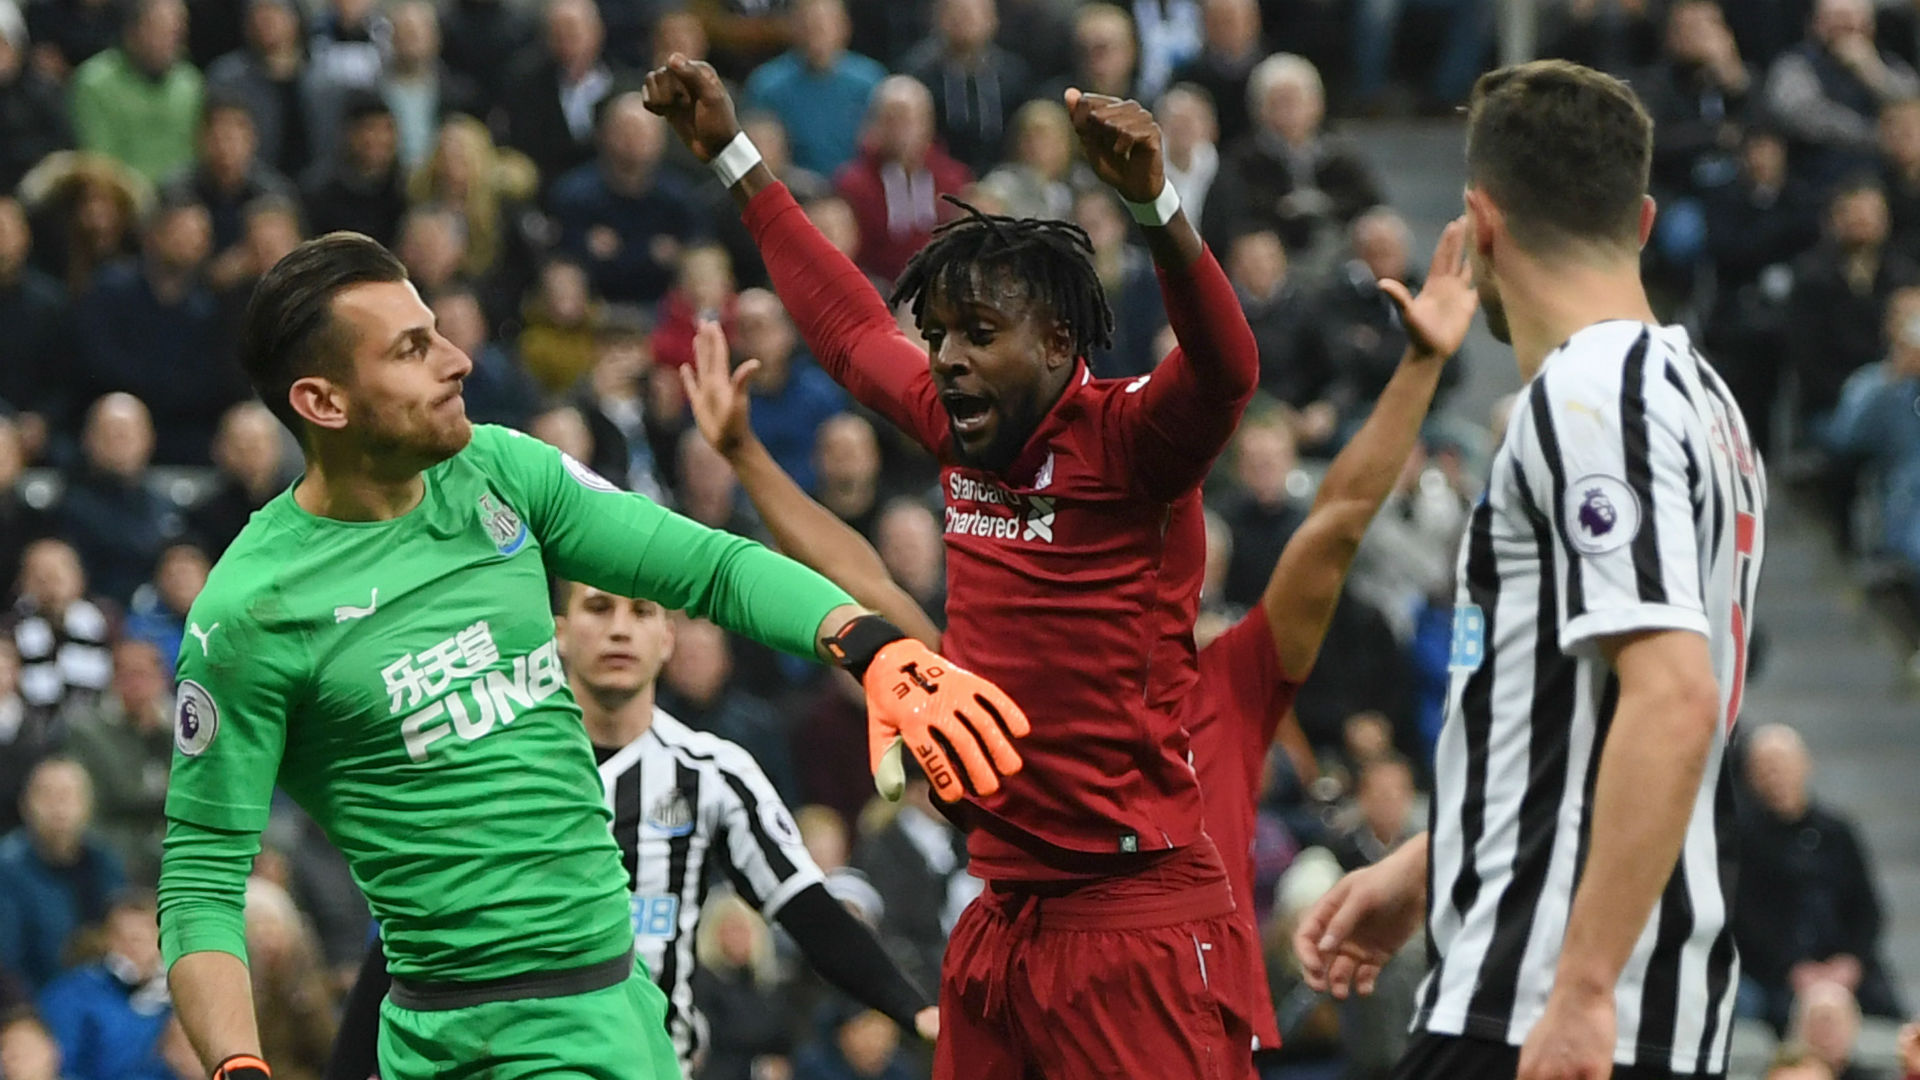 Newcastle 2-3 Liverpool: Resilient Reds lose Salah to injury but refuse to stop ...1920 x 1080